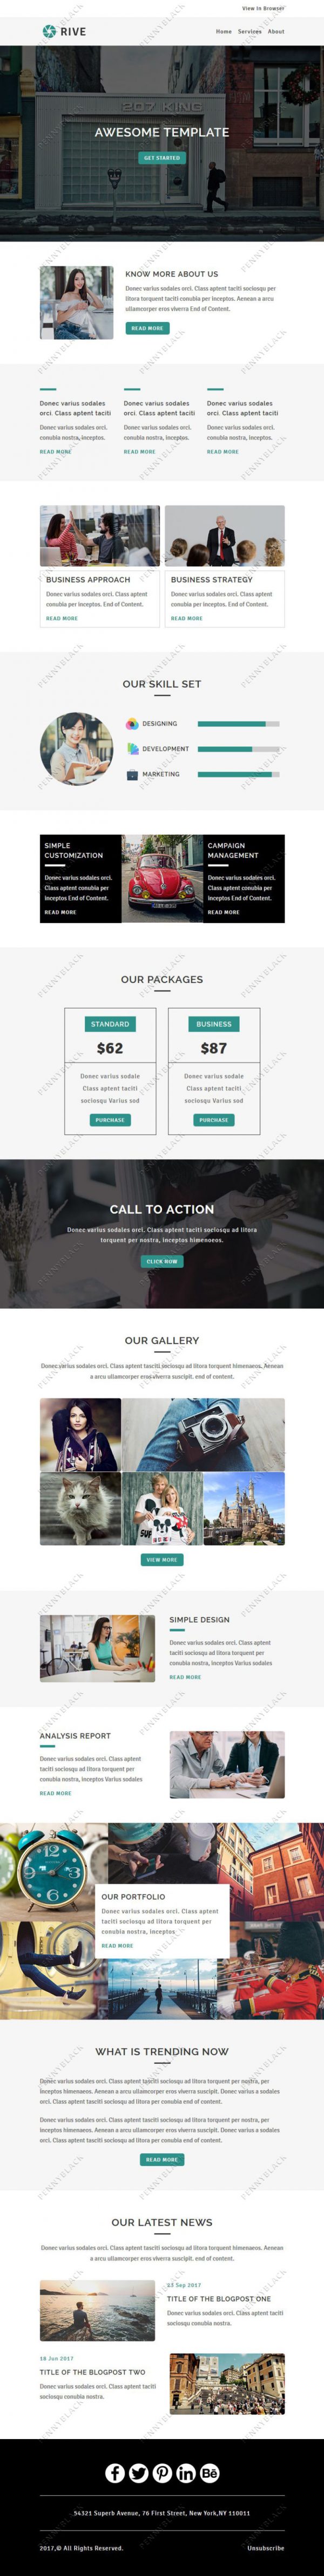 Rive - Responsive Email Template